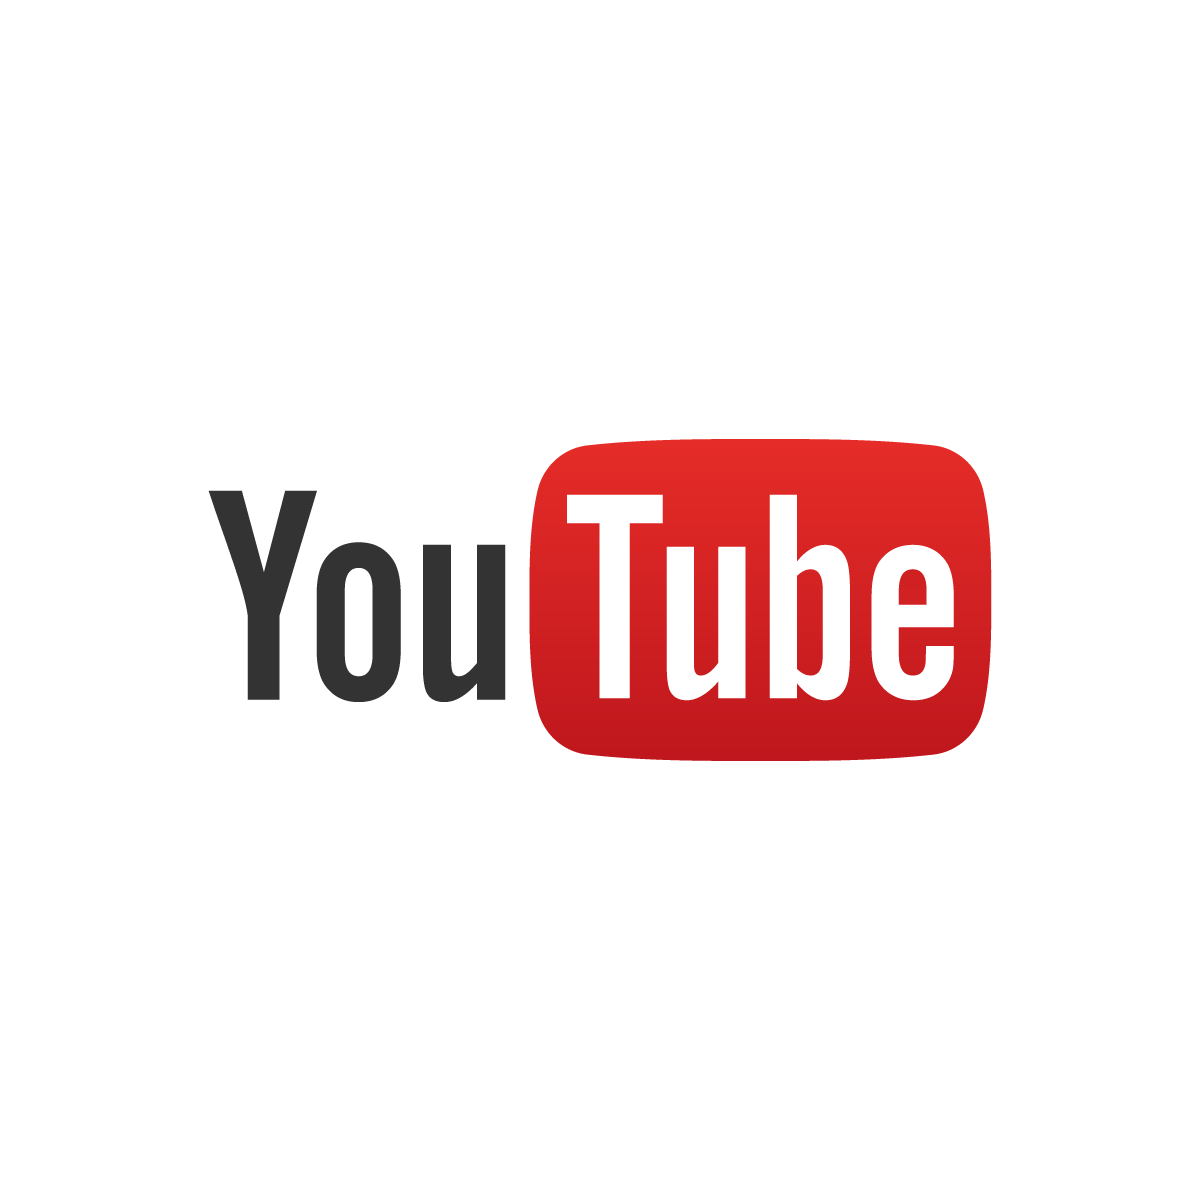 Visit our YouTube Channel!